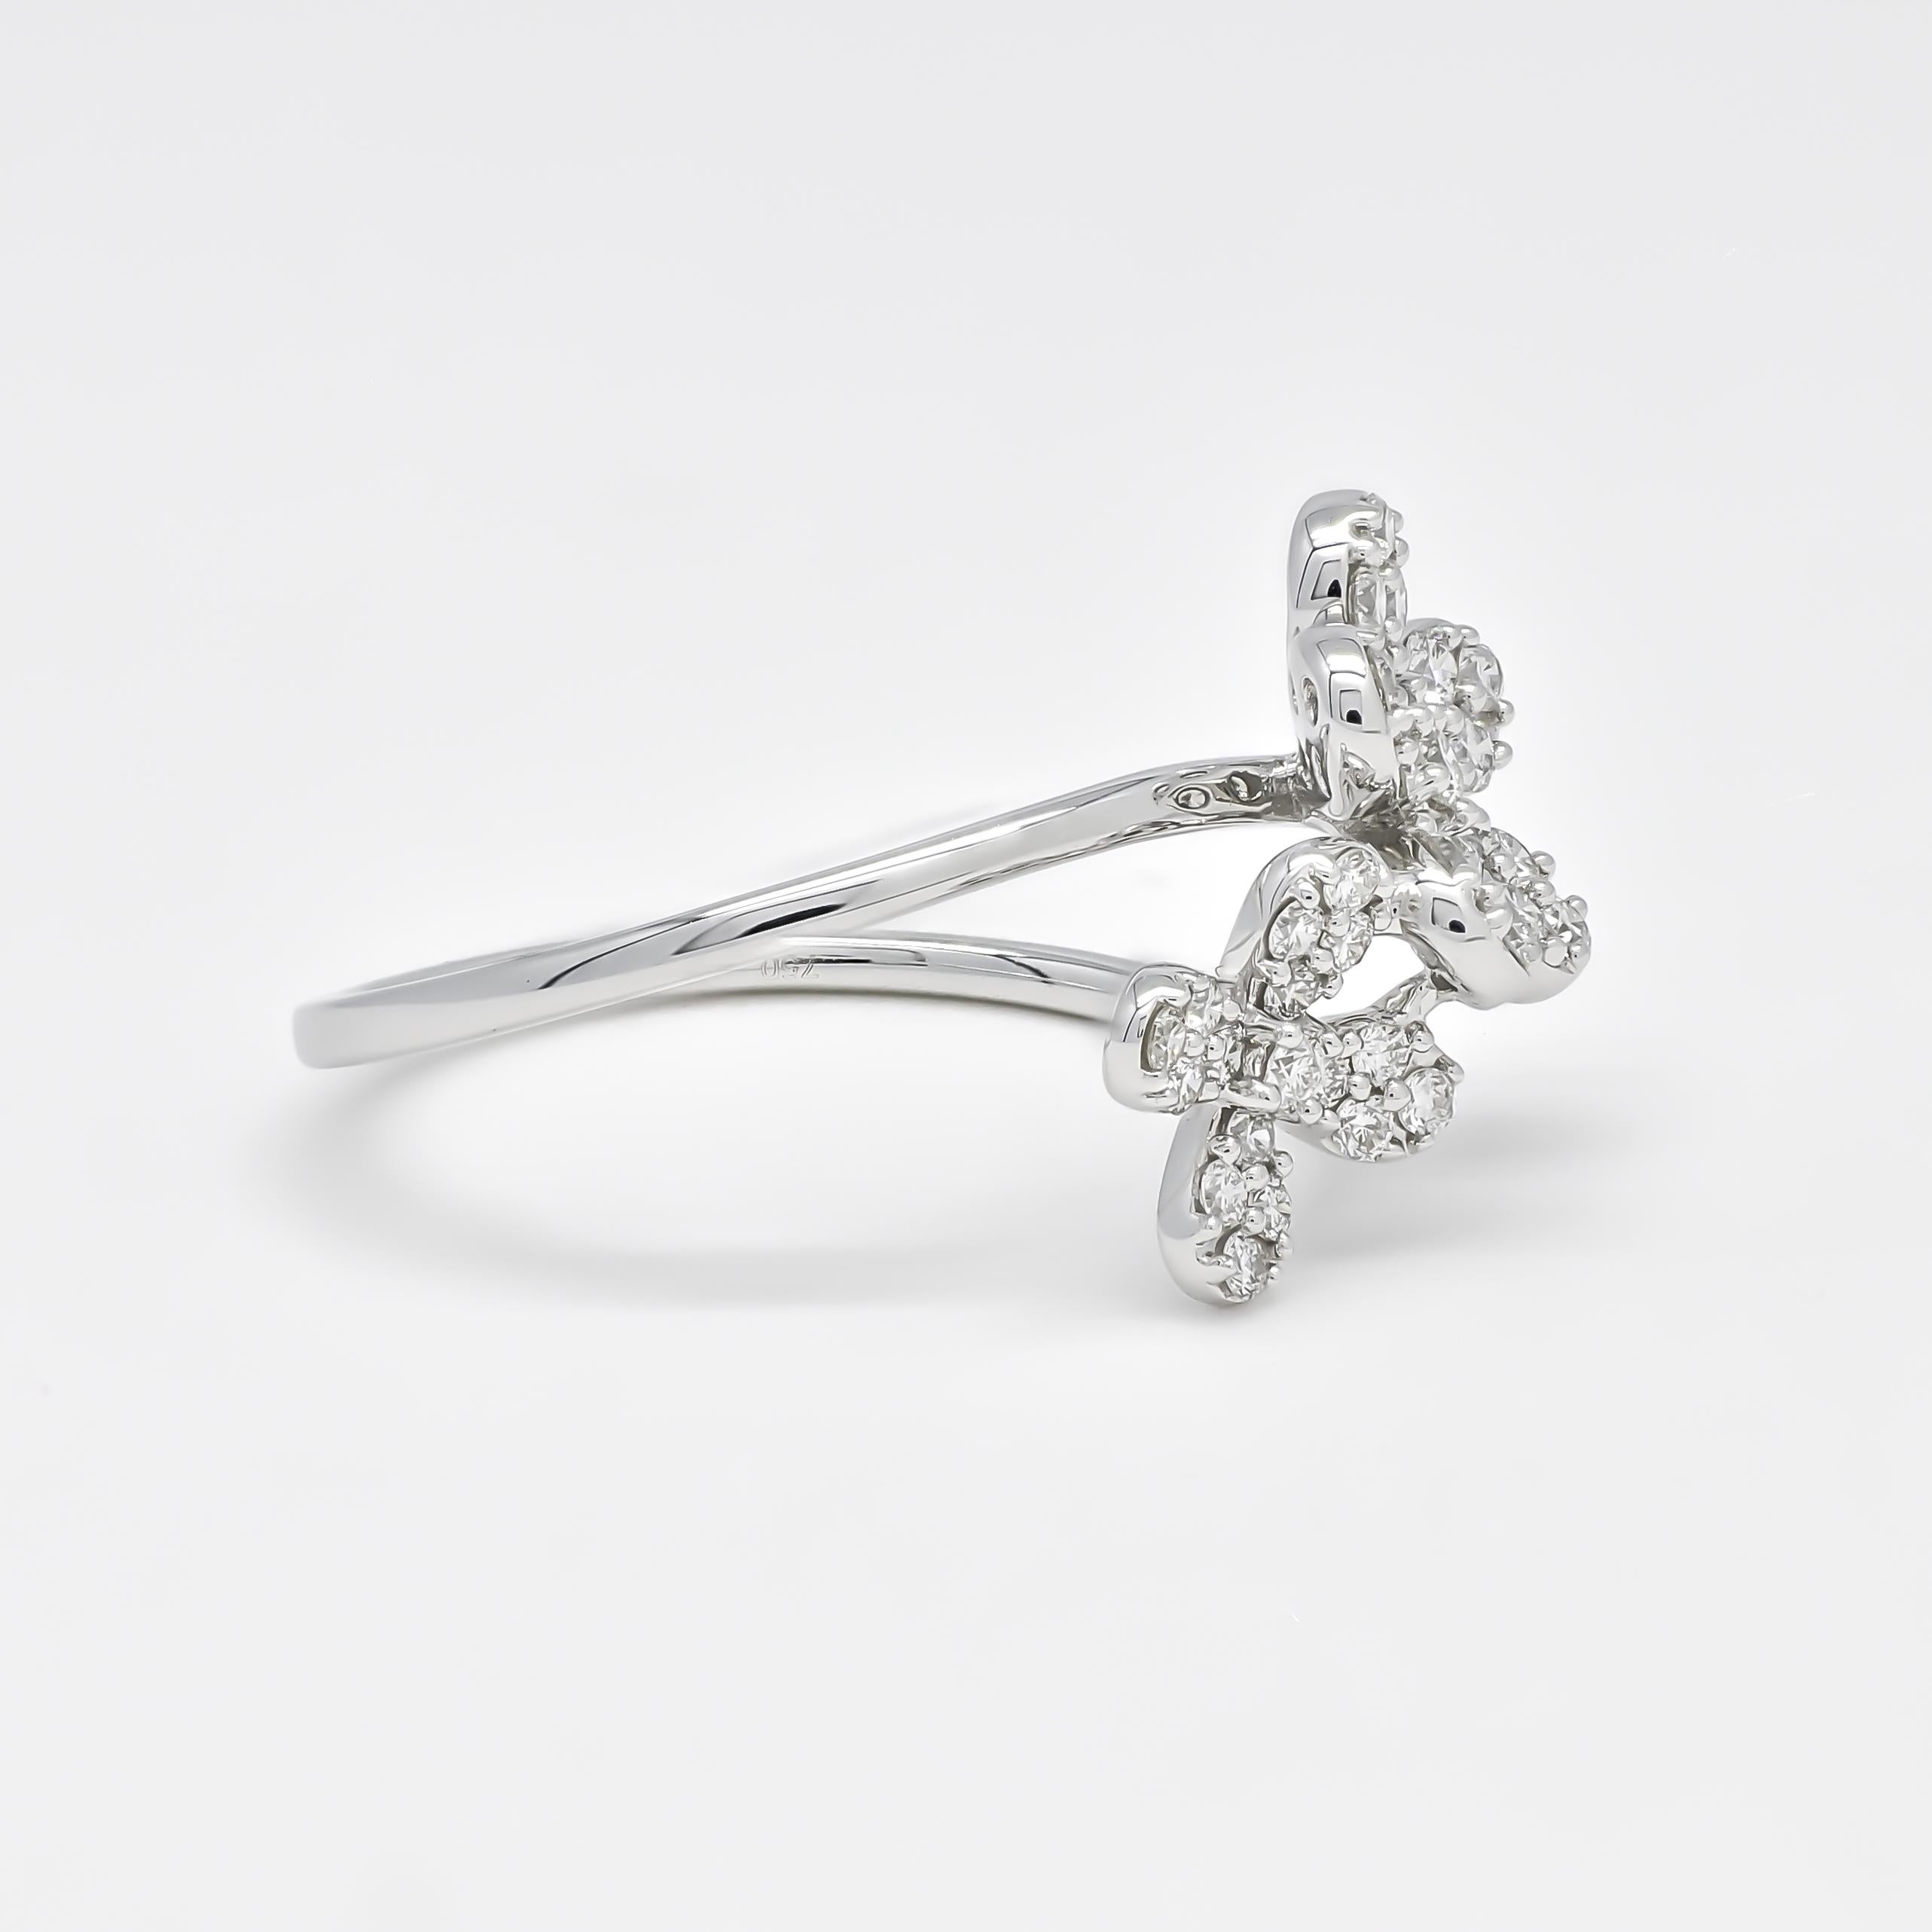 A flower cluster diamond ring is a timeless and elegant piece of jewelry that is perfect for any young girl. This 18KT white gold petite ring is especially designed to fit the delicate fingers of a young girl, making it the perfect choice for her